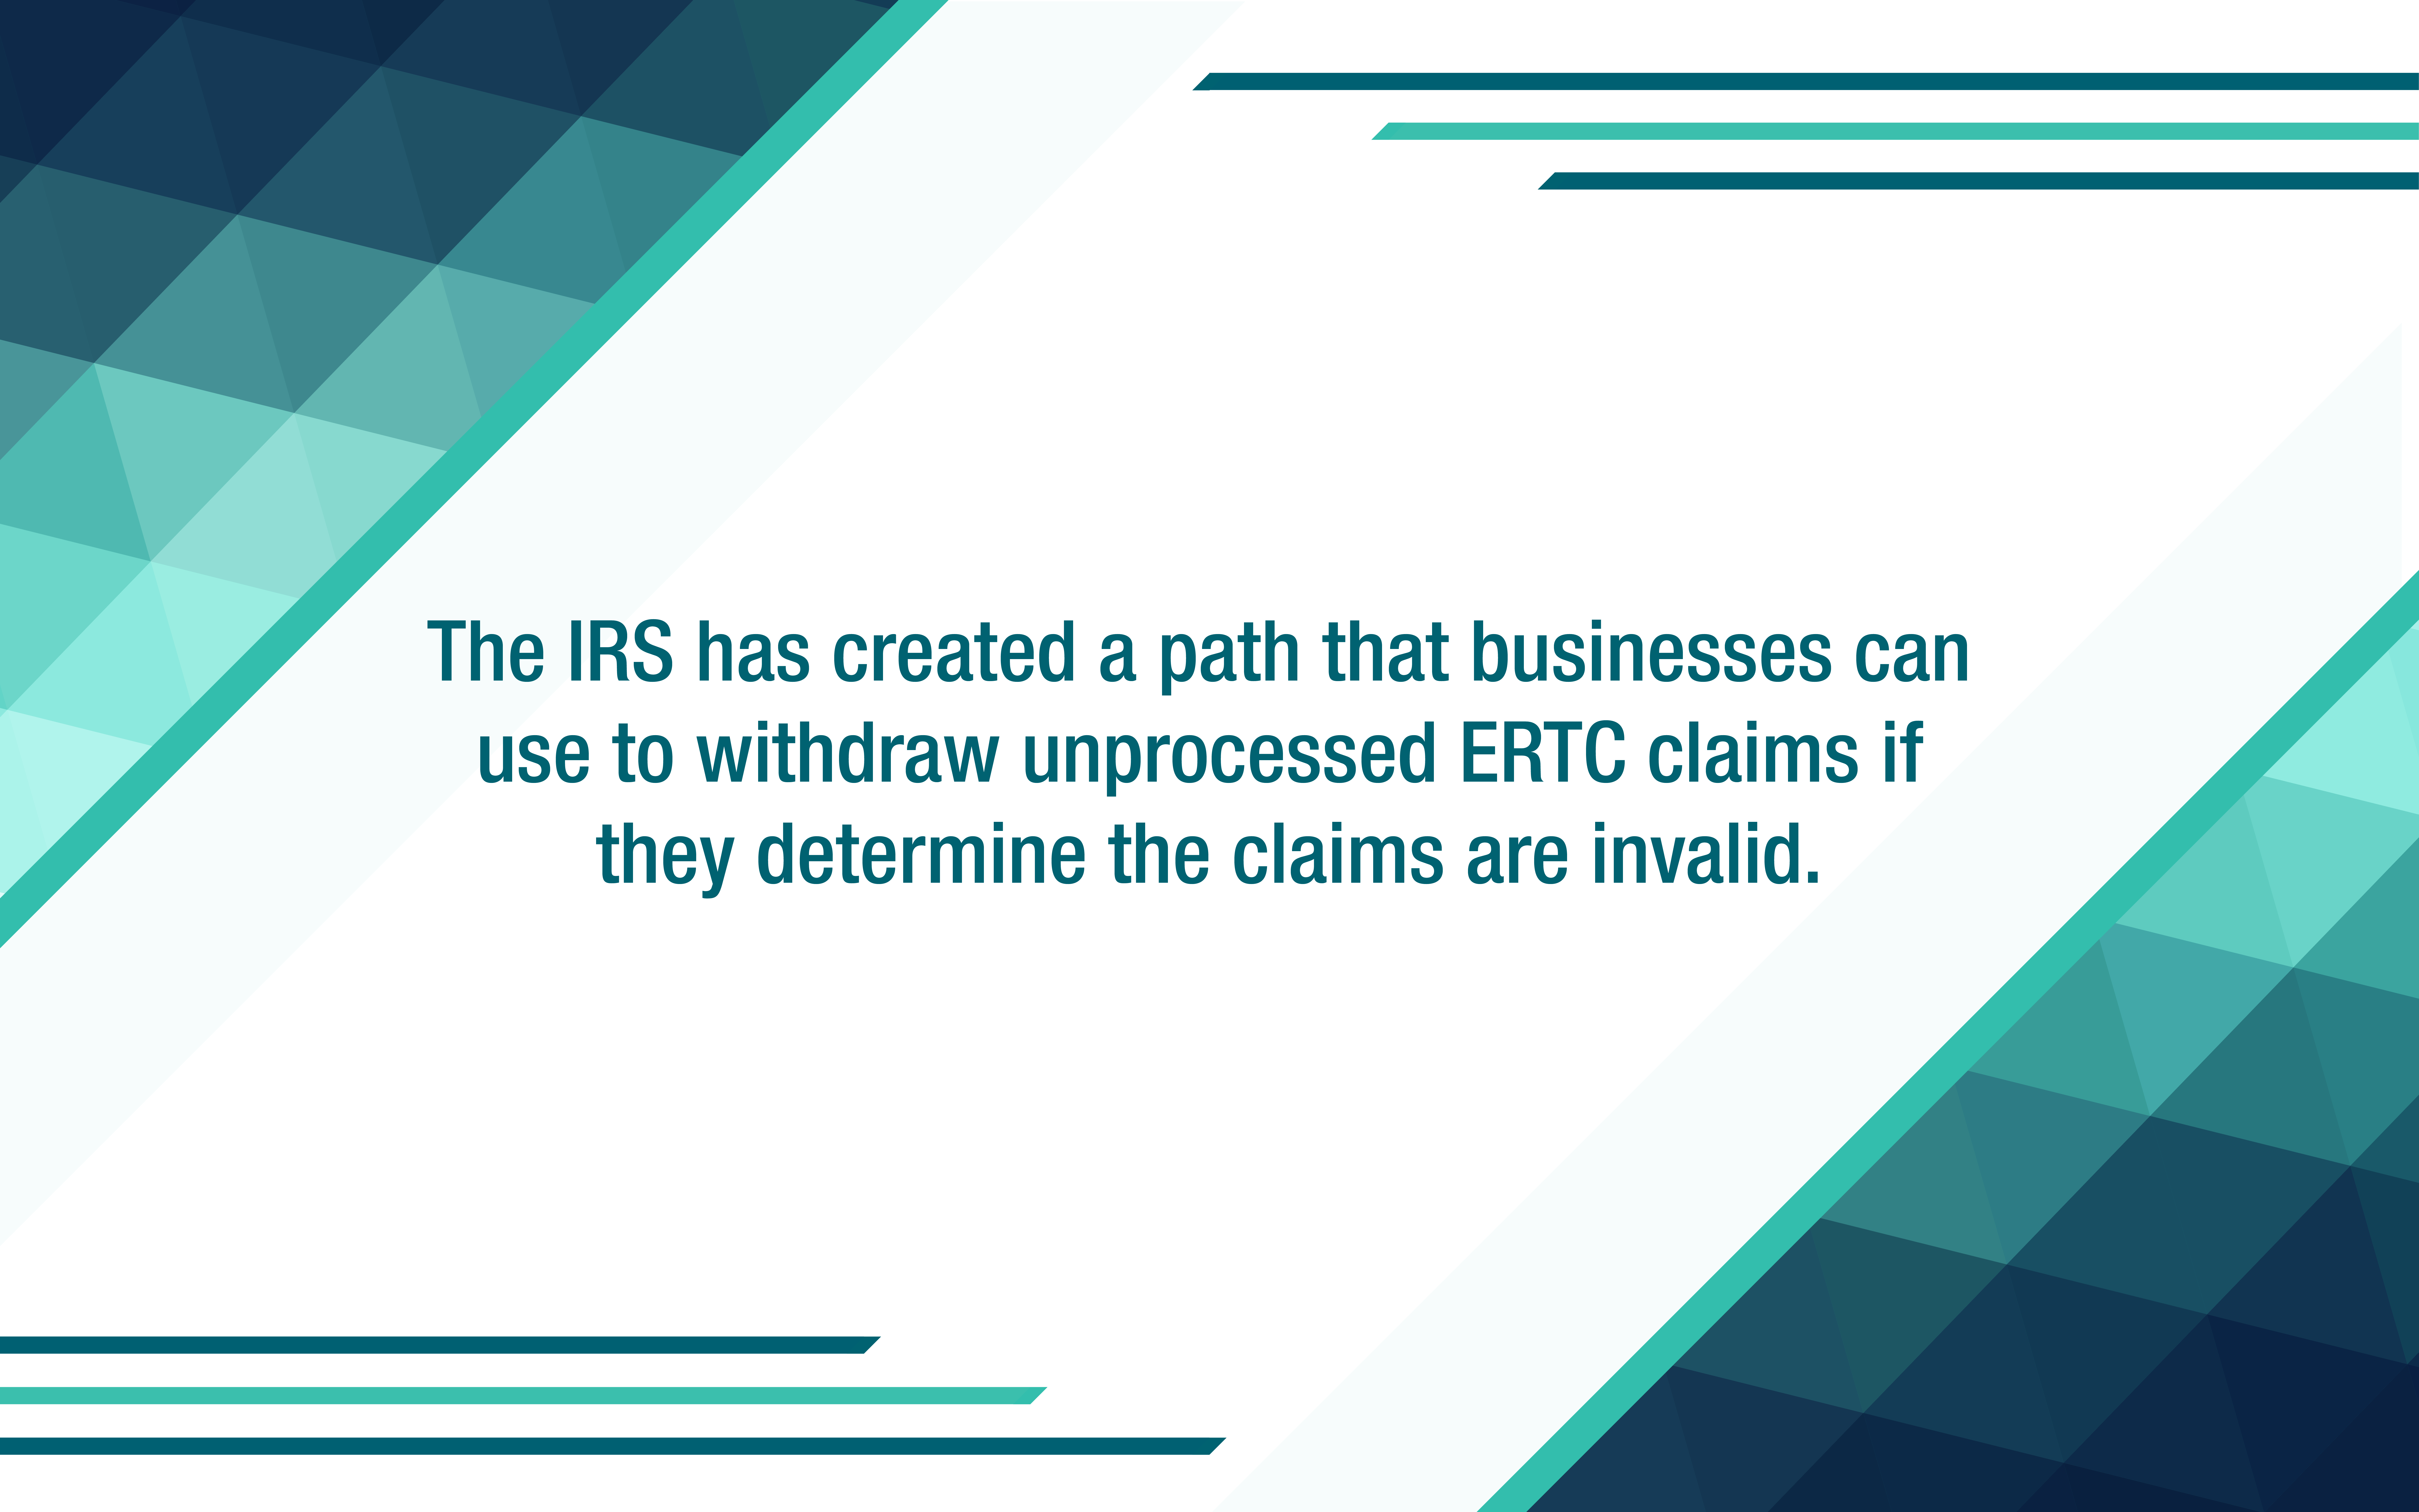 IRS offers a withdrawal option to businesses that claimed ERTCs